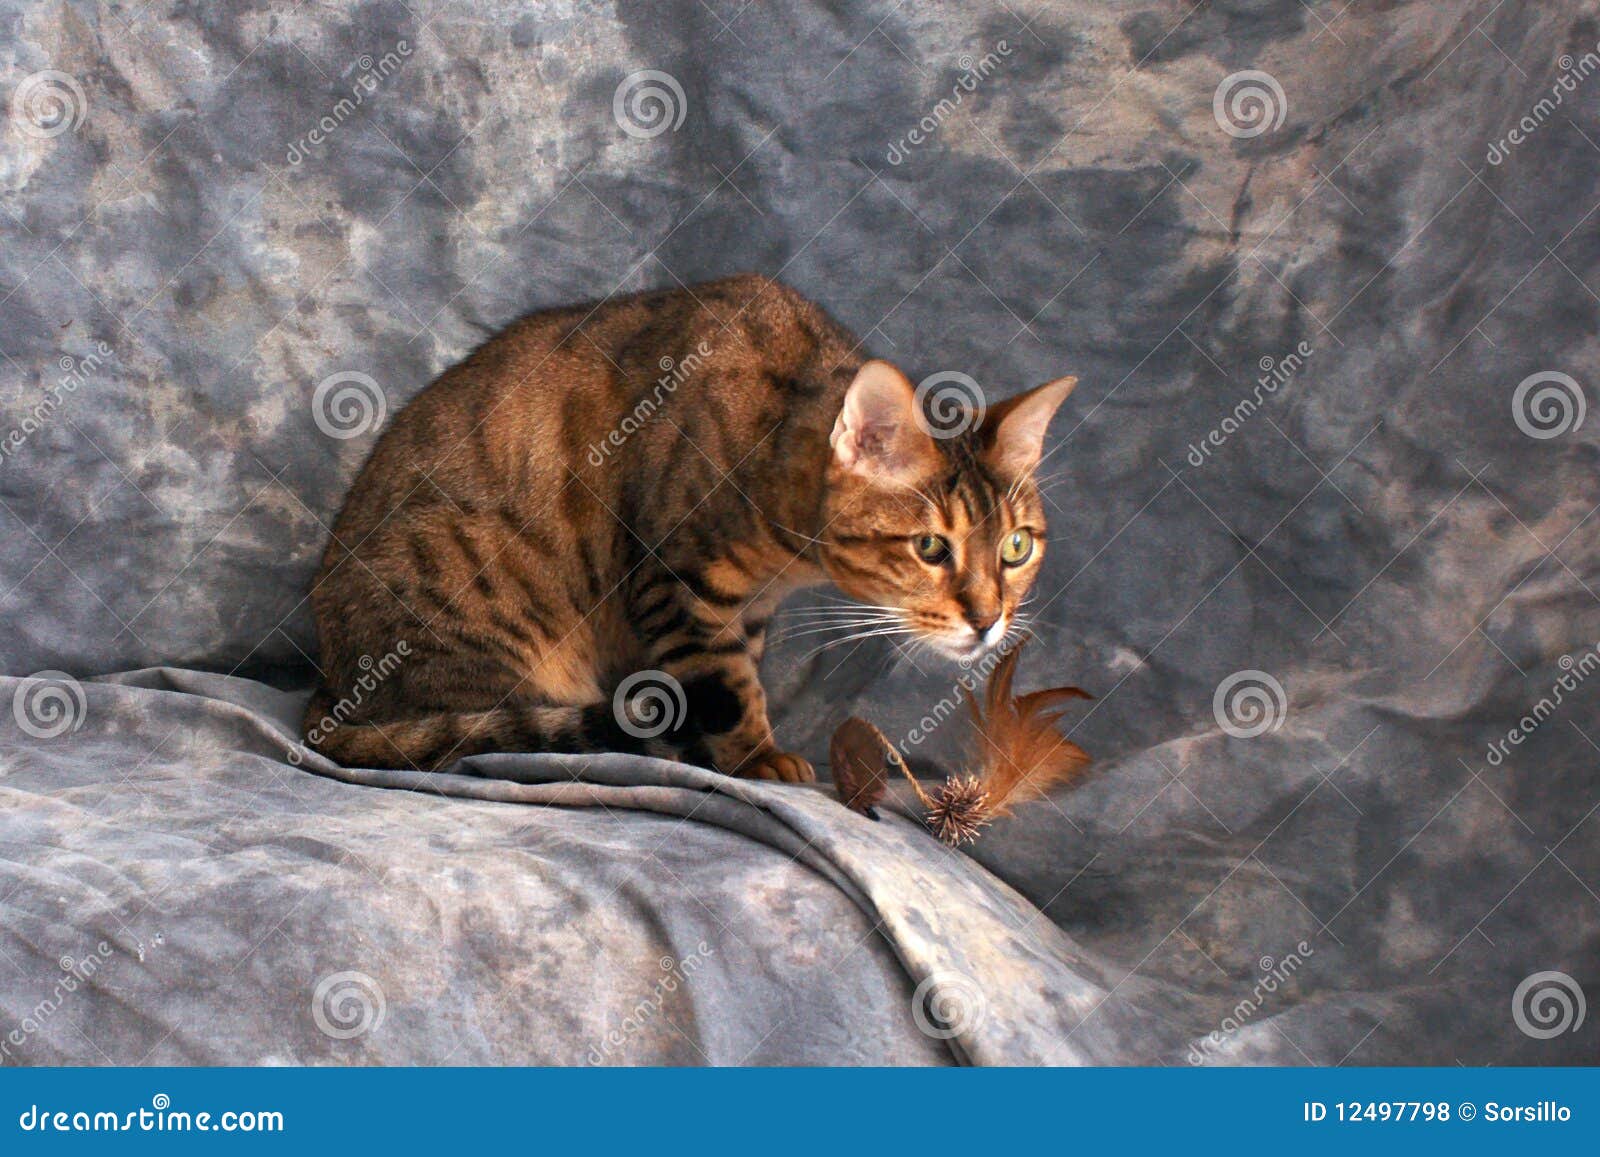 Bengal cat  ready to pounce  stock photo Image of stripe 